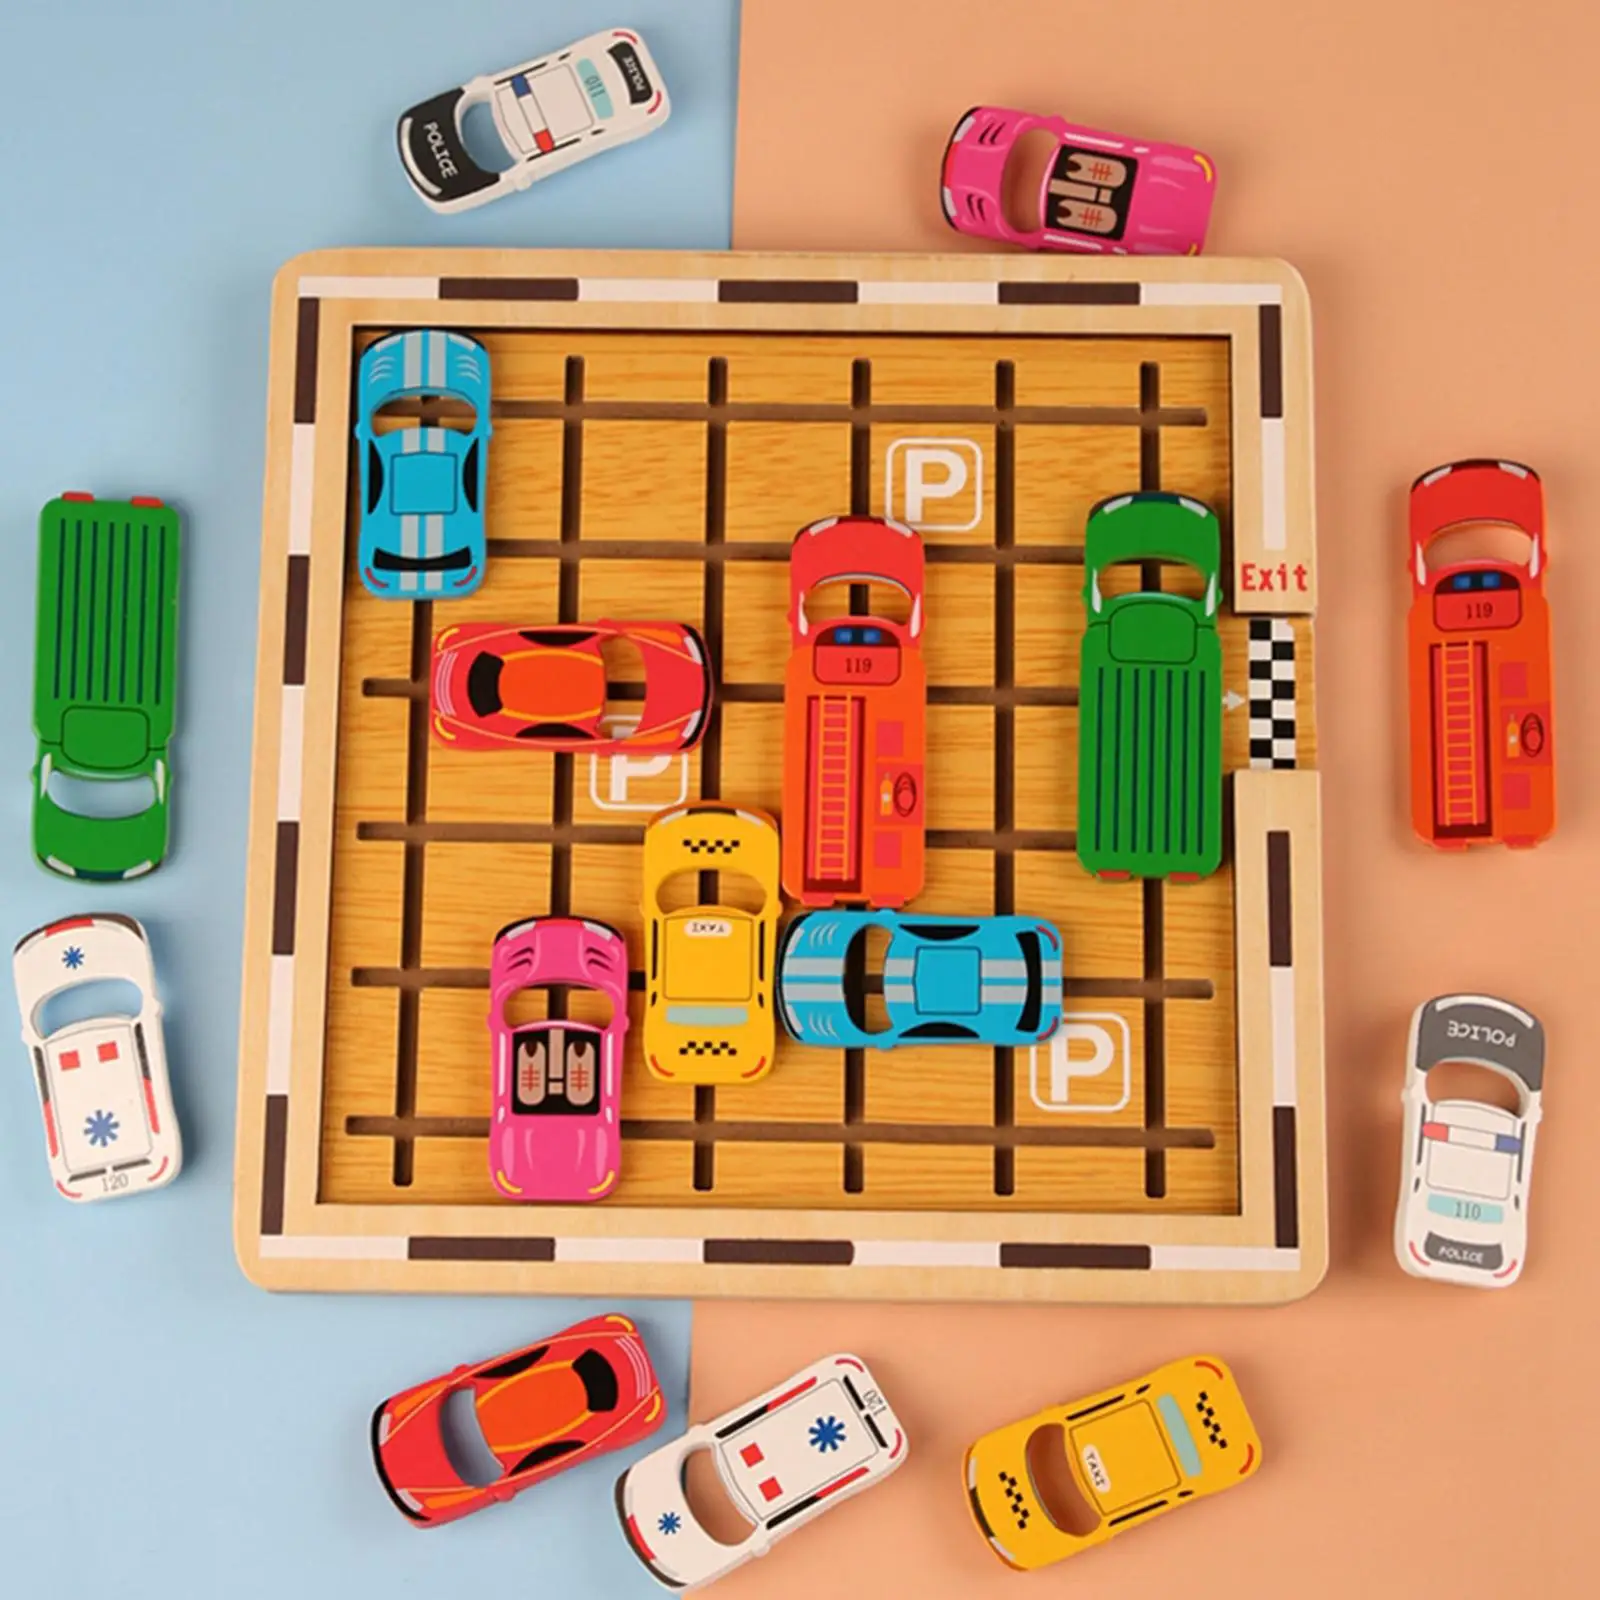 Wooden Early Education Car Educational Toys Sensory Toy Exercise Brain Ability Development for Toddlers Boys Kids Gifts